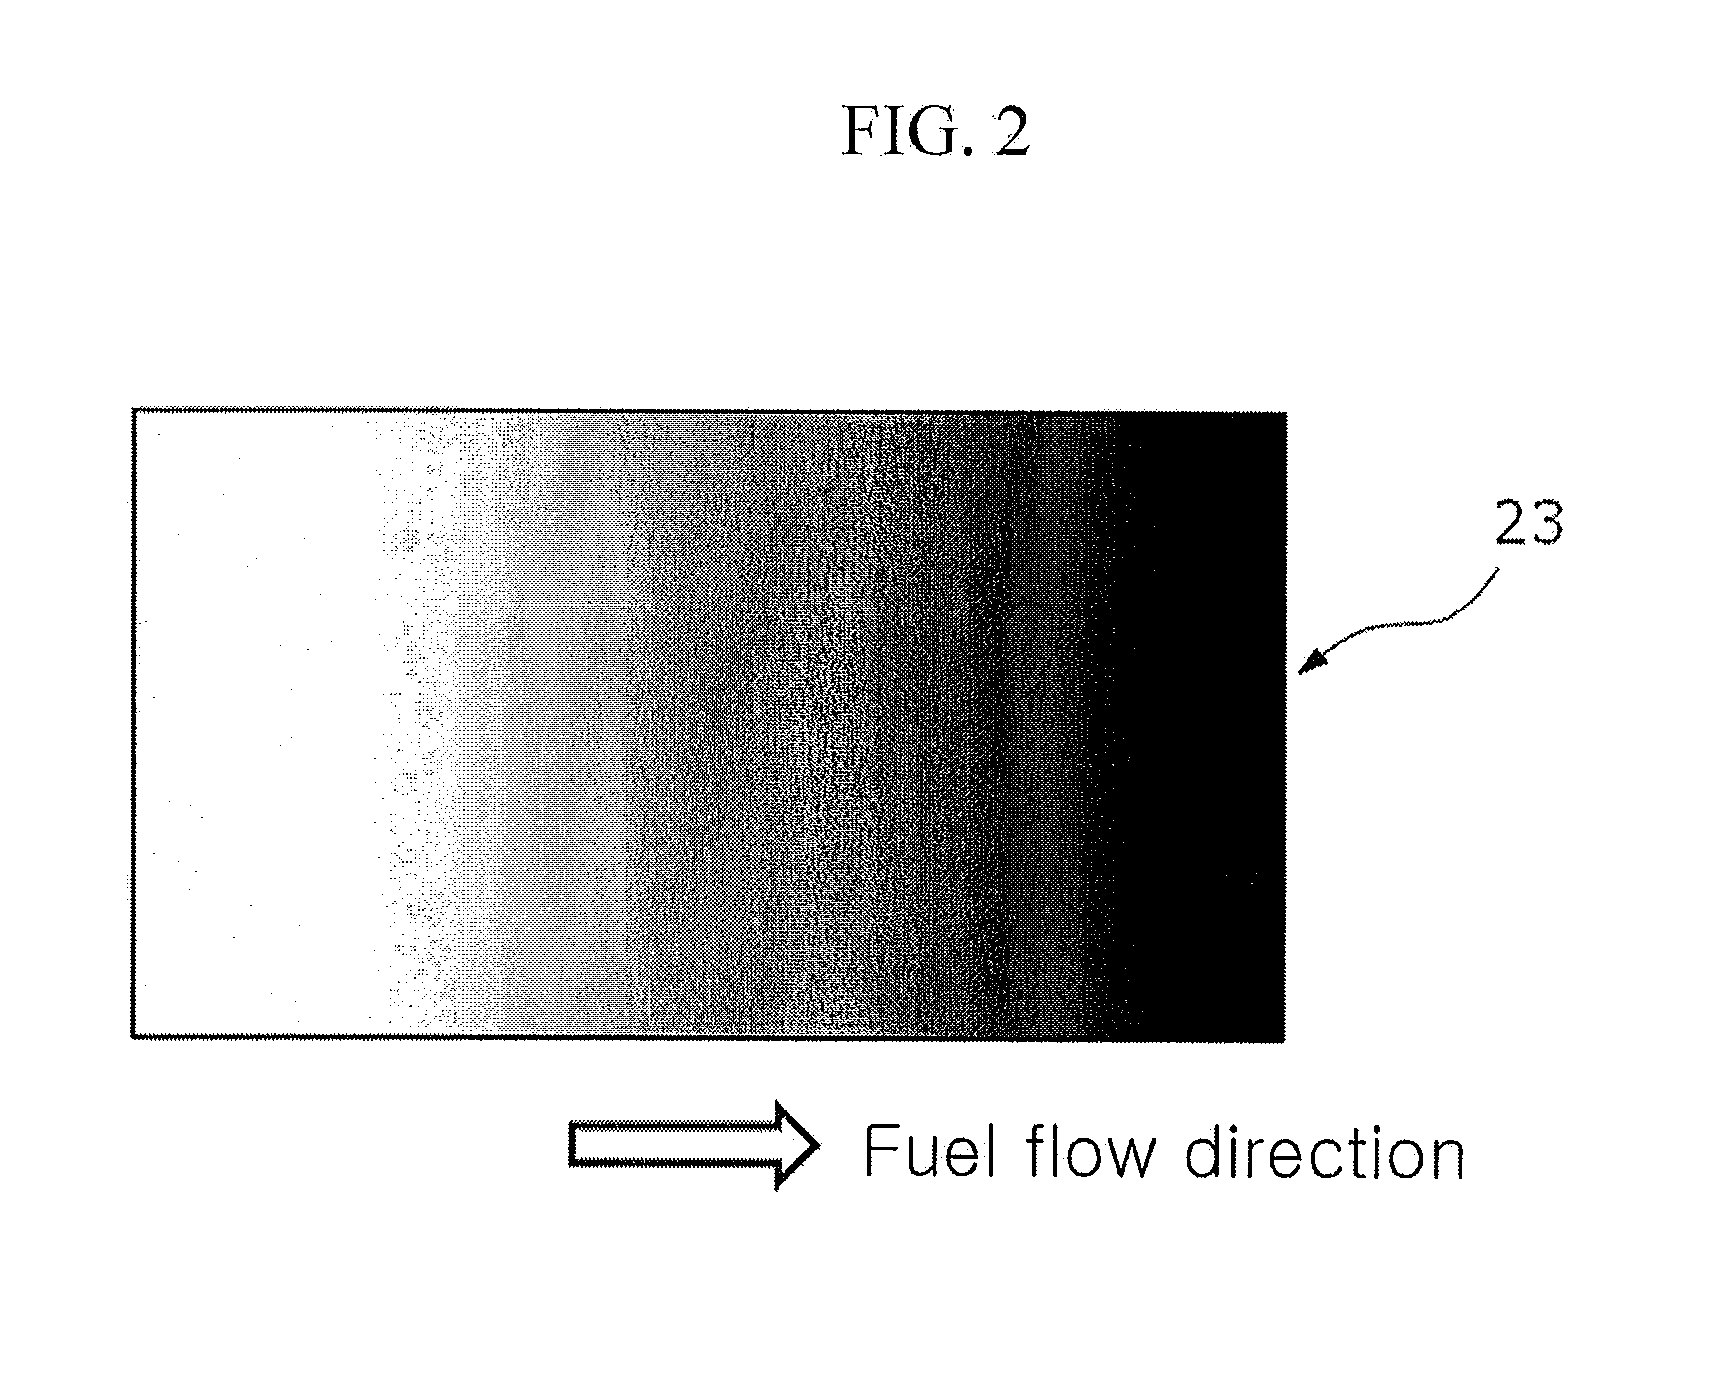 Solid Oxide Fuel Cell, Method of Fabricating the Same, and Tape Casting Apparatus for Fabricating Anode